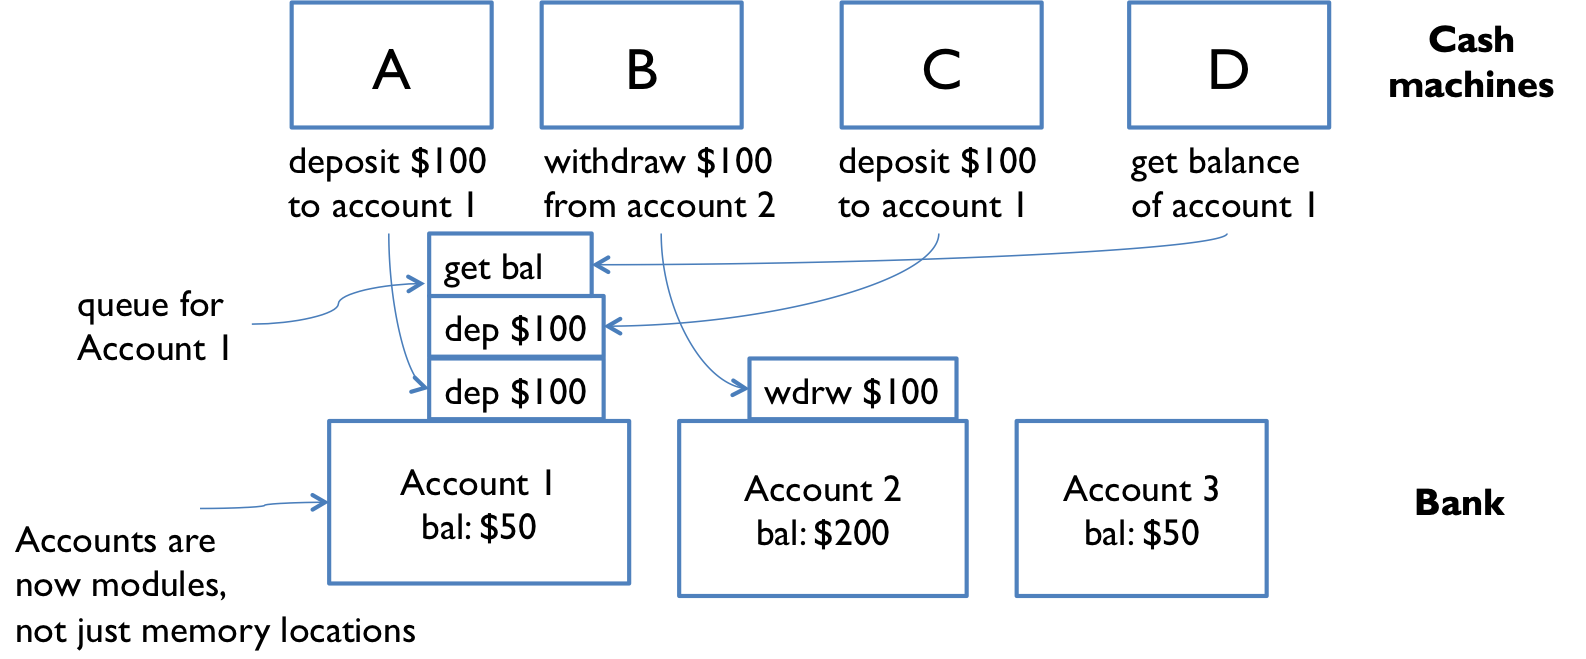 message passing bank account example